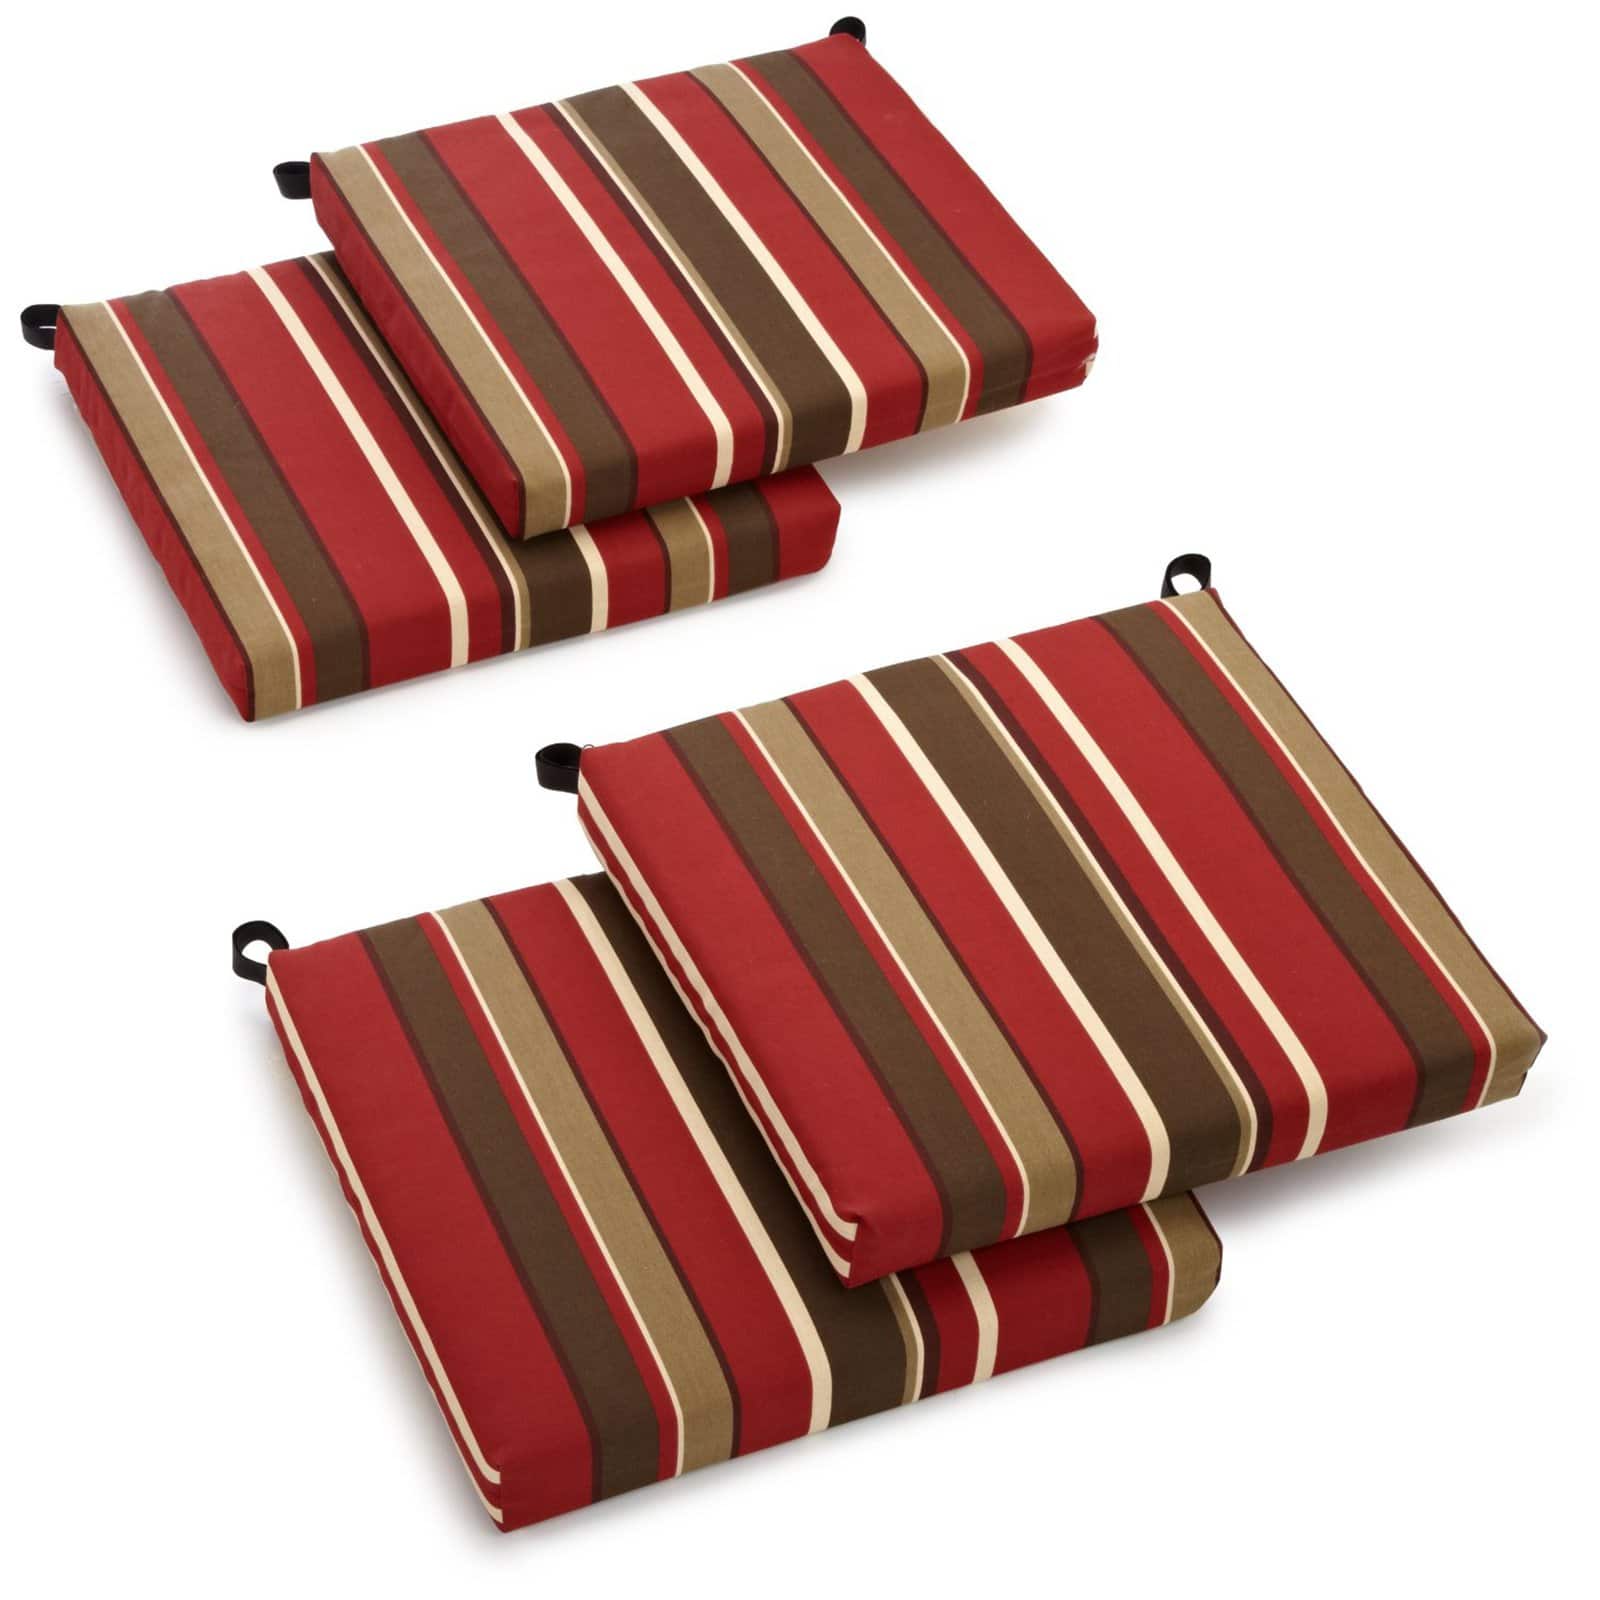 Blazing Needles 20-inch by 19-inch Spun Polyester Chair Cushion (Set of Four) - image 2 of 2